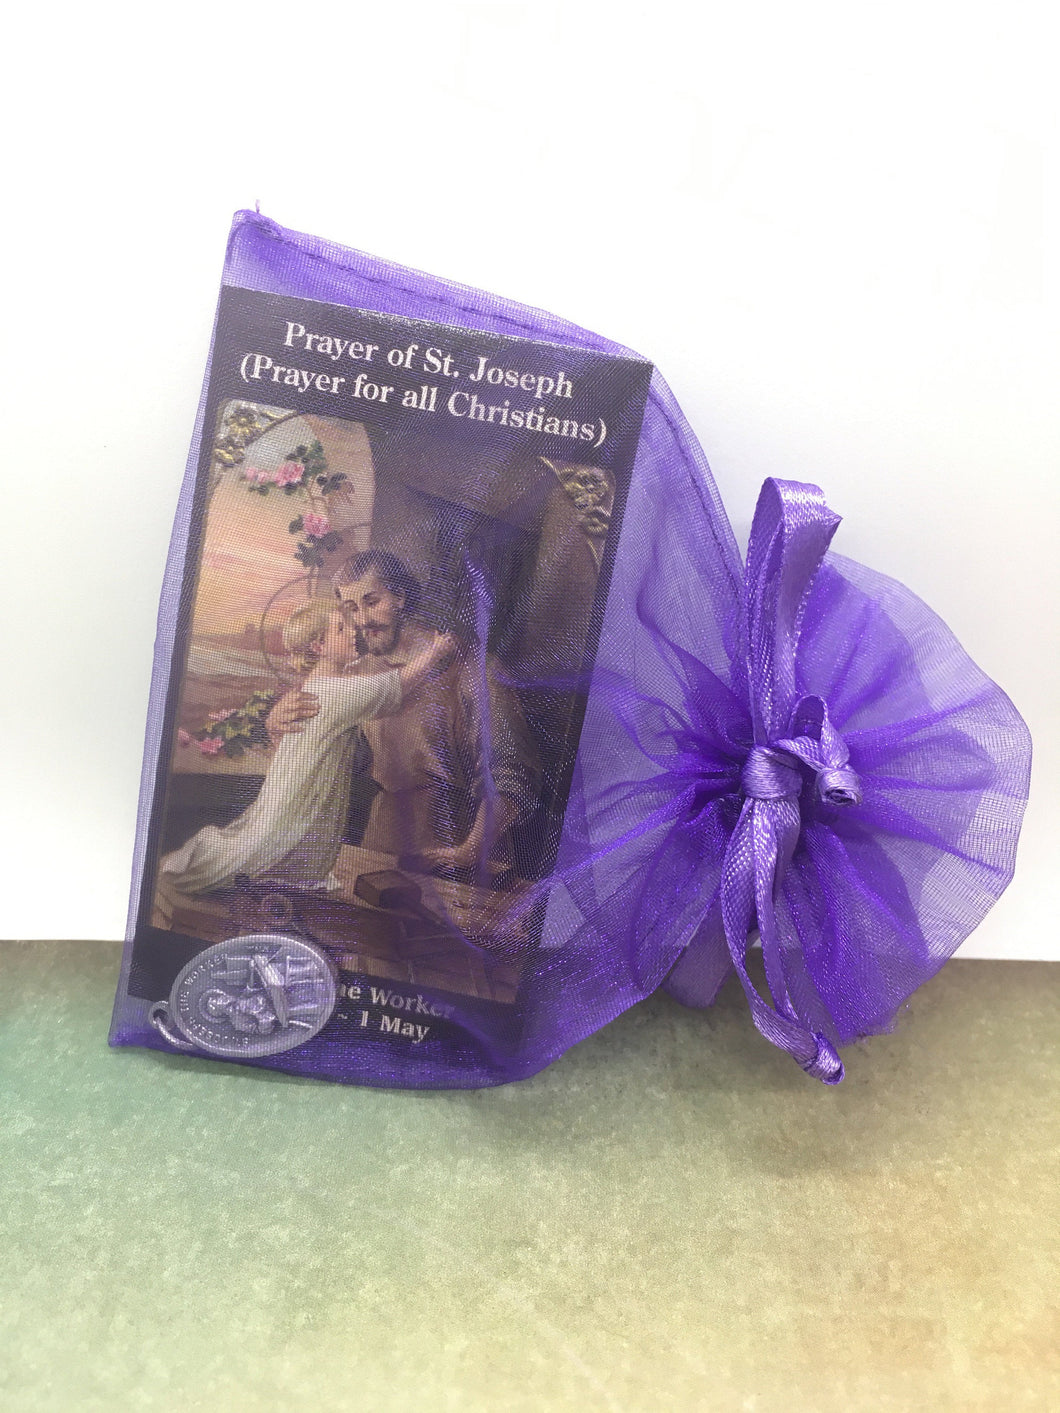 St. Joseph the Worker prayer card and holy medal gift set